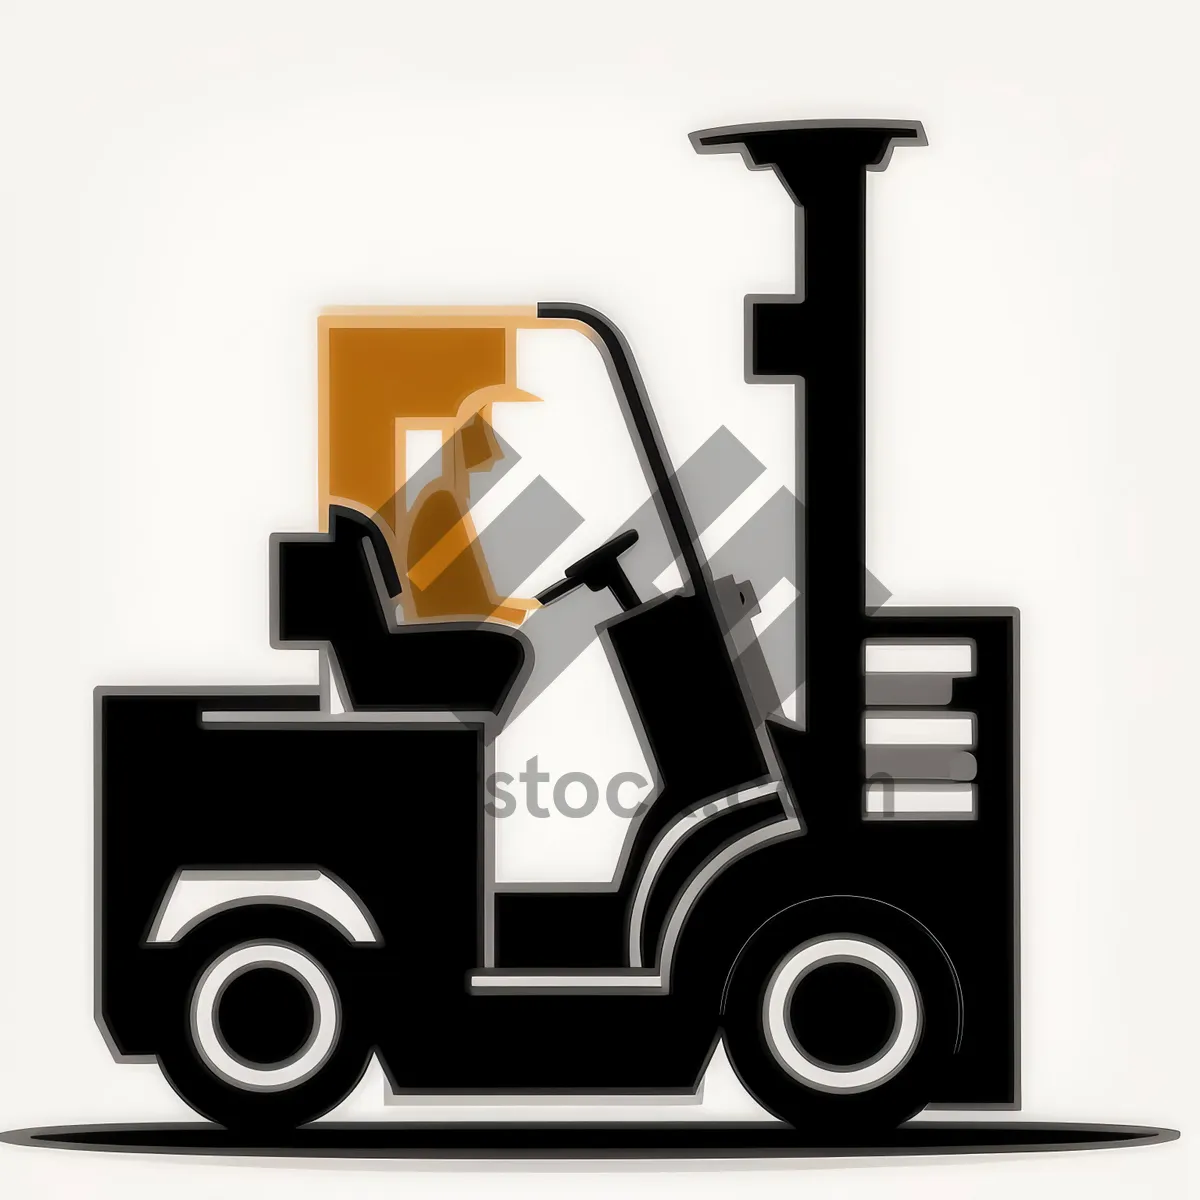 Picture of Golfer symbol icon set: Car sign icons